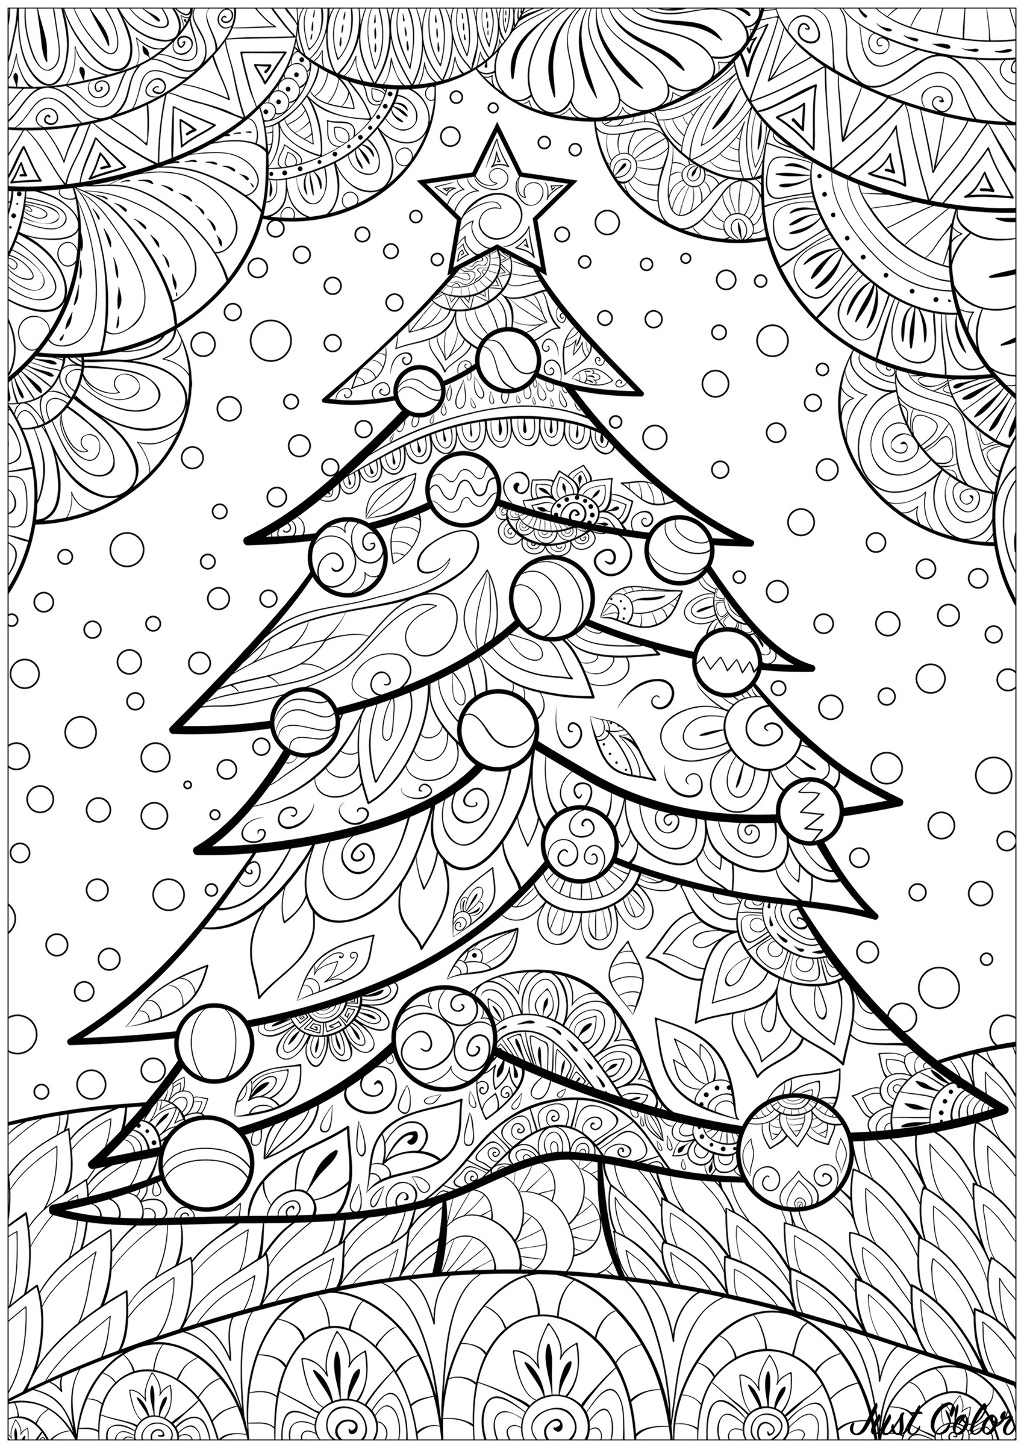 Majestic Christmas tree, with intricately patterned background